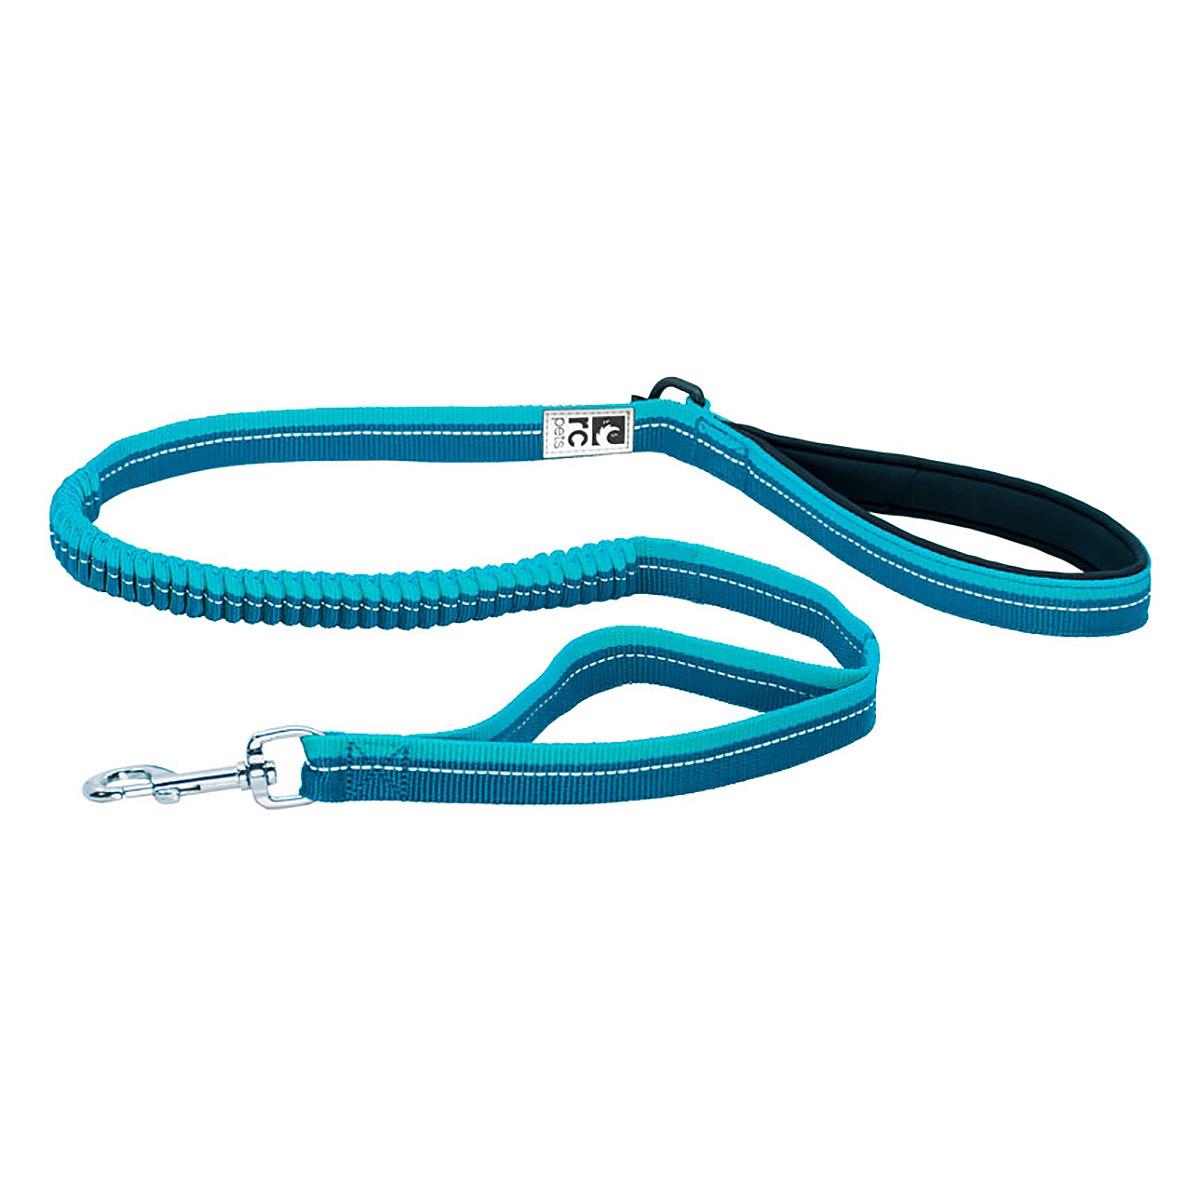 Bungee Traffic Dog Leash by RC Pets - Arctic Blue and Teal